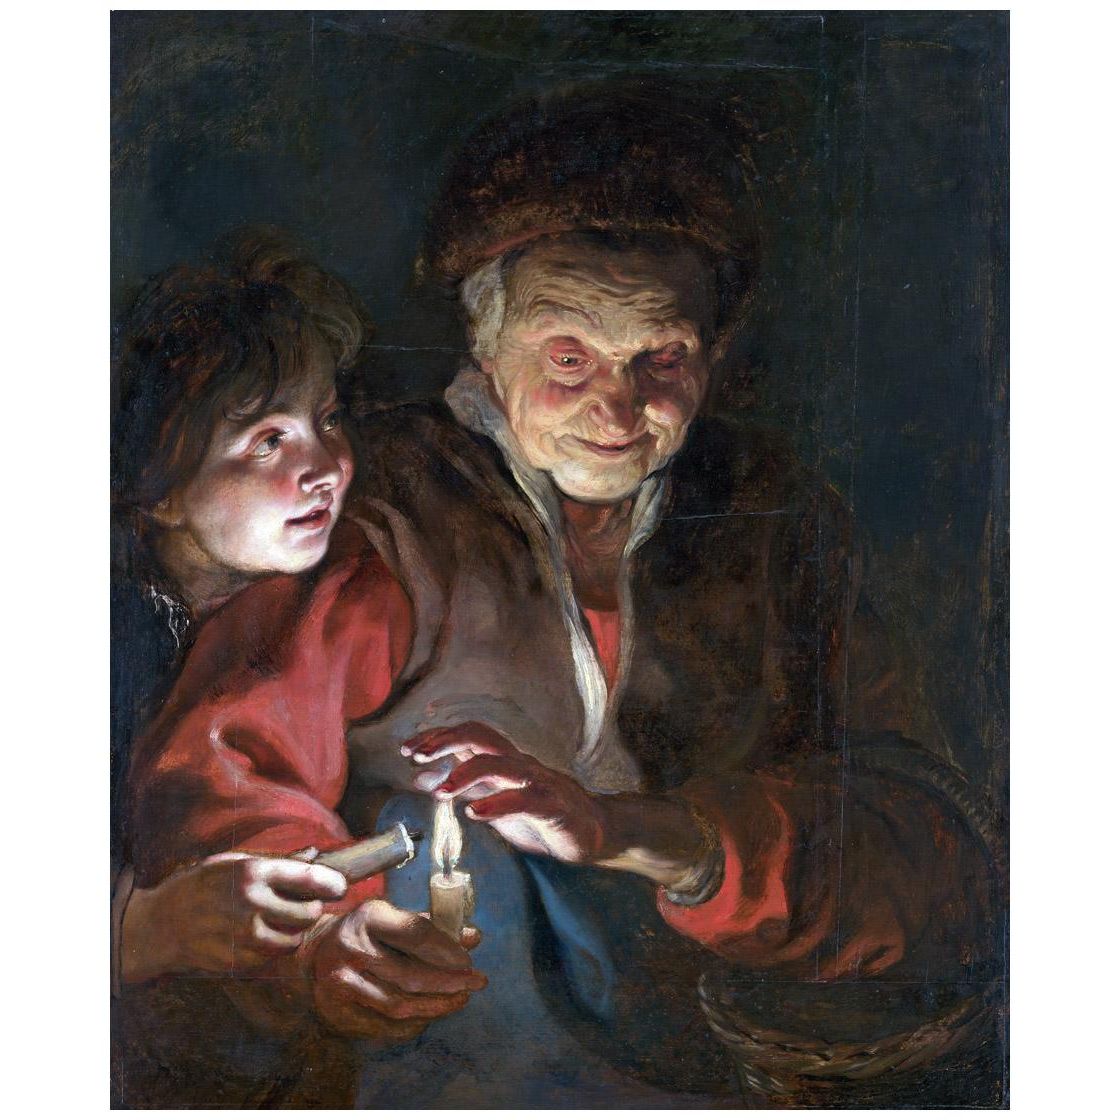 Peter Paul Rubens. Old Woman and Boy with Candles. 1617. Mauritshuis Den Haag